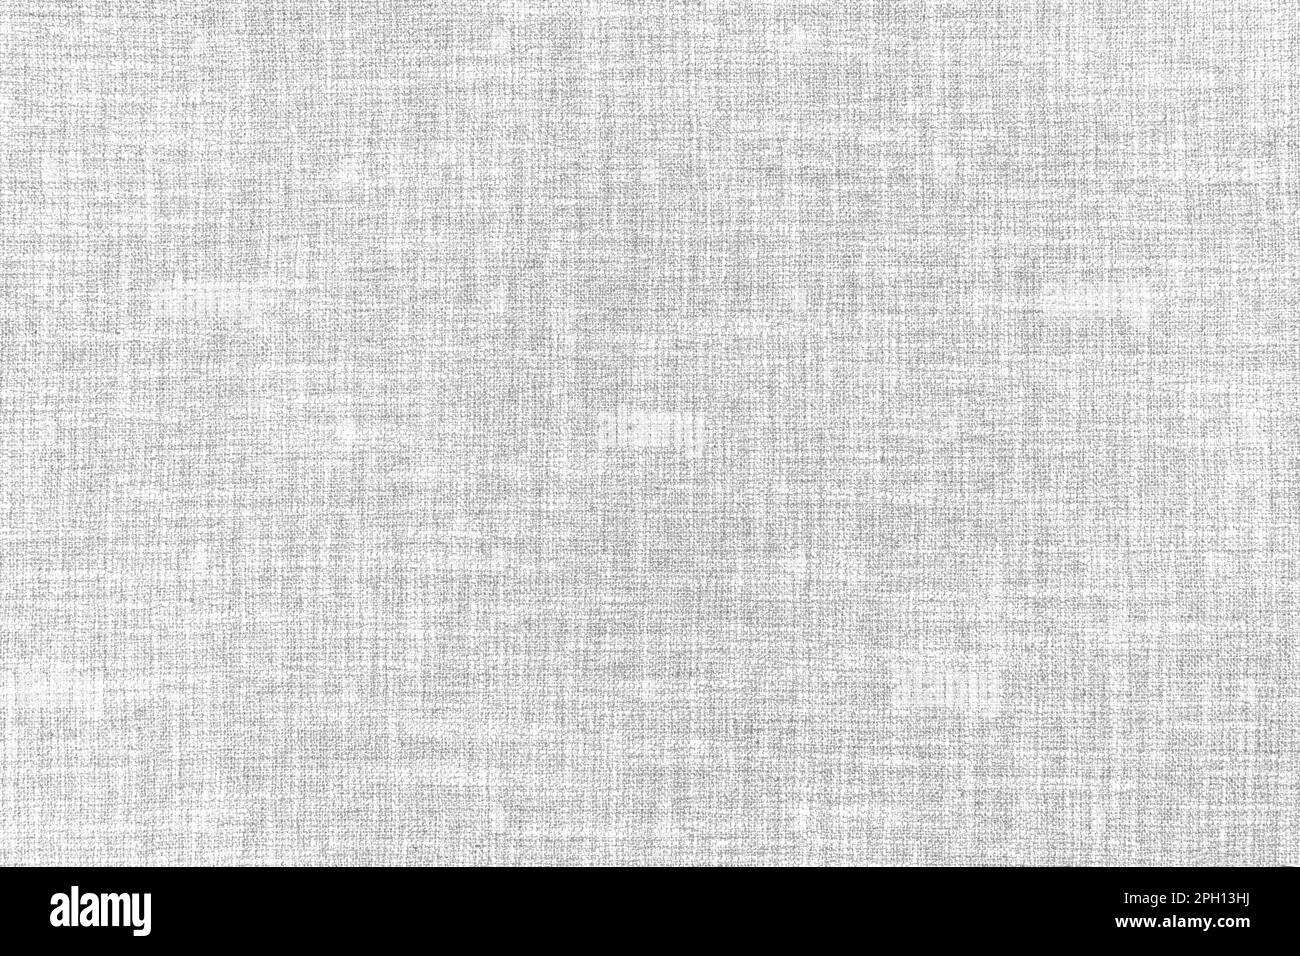 Texture of natural upholstery fabric or cloth. Fabric texture of natural cotton or linen textile material. White canvas background. Decorative fabric Stock Photo